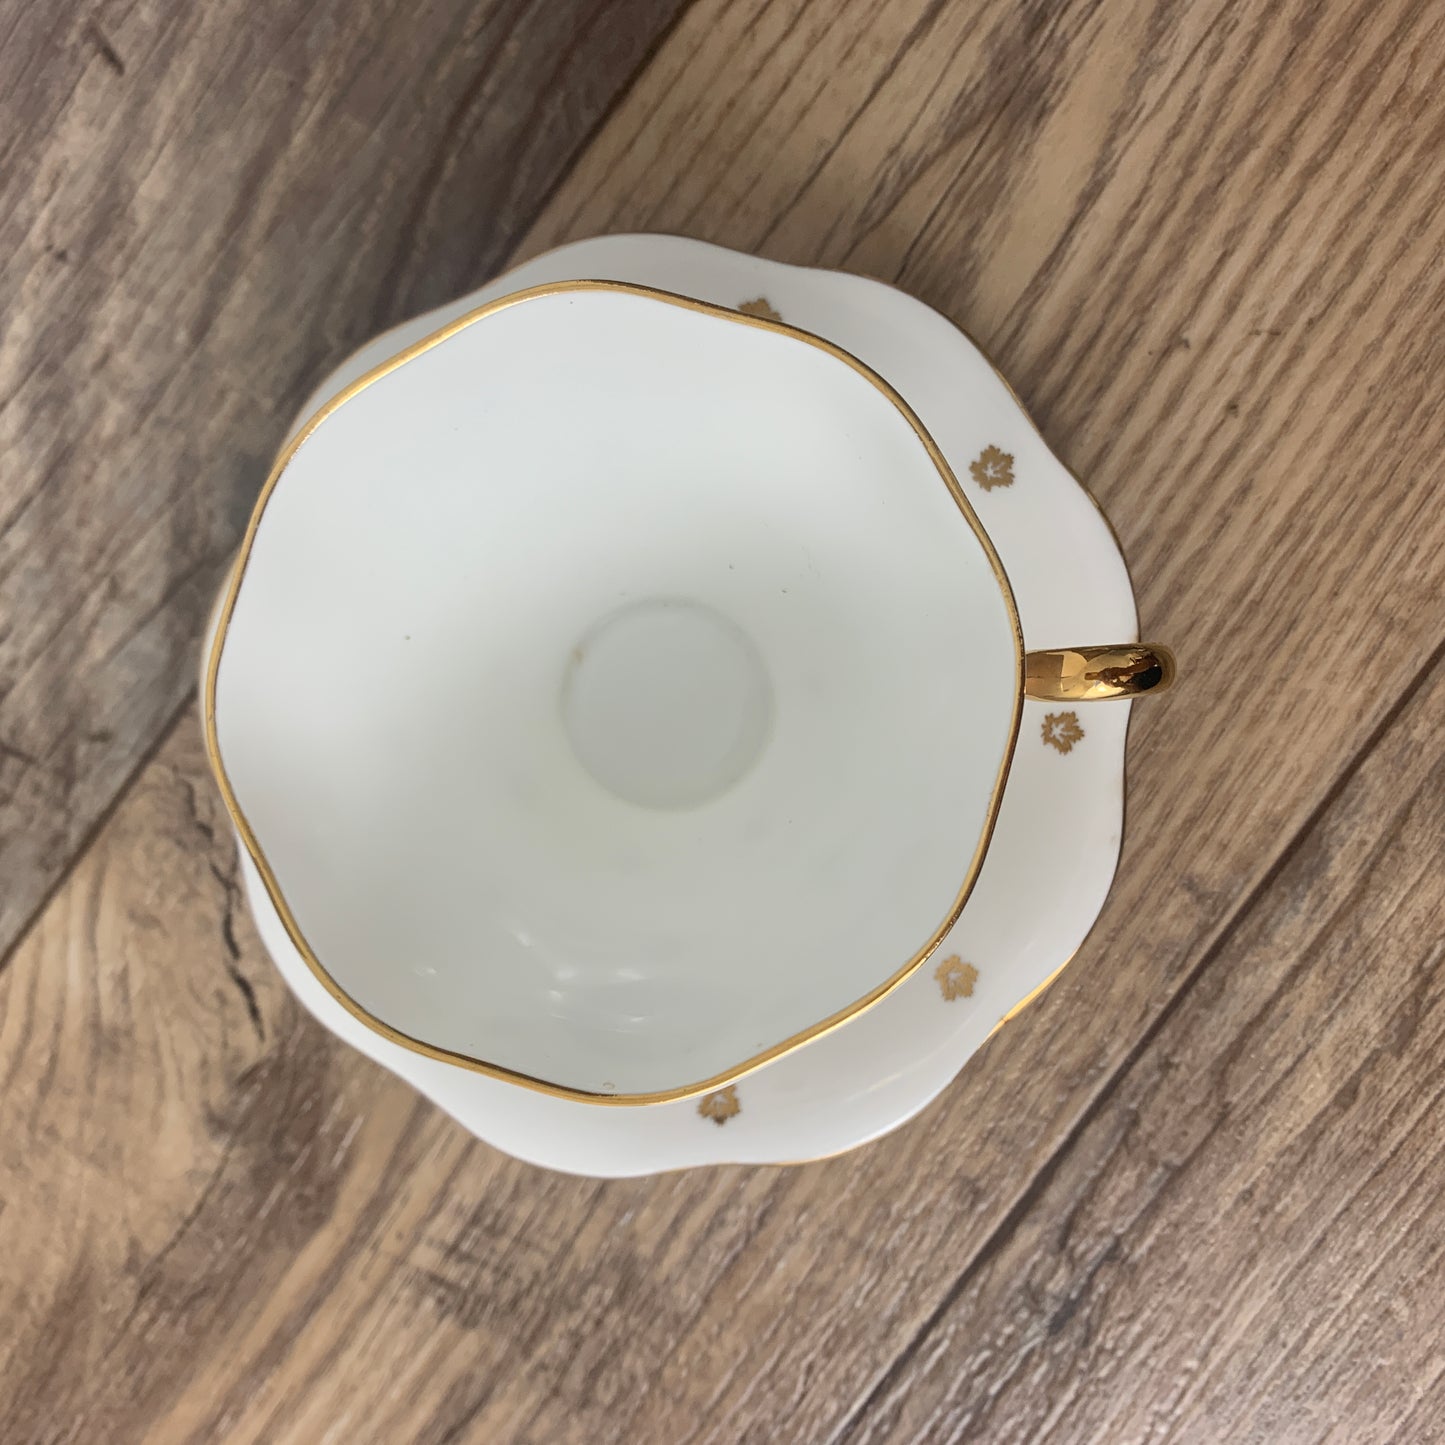 White and Gold Vintage Teacup and Saucer For Home and Country EB Foley